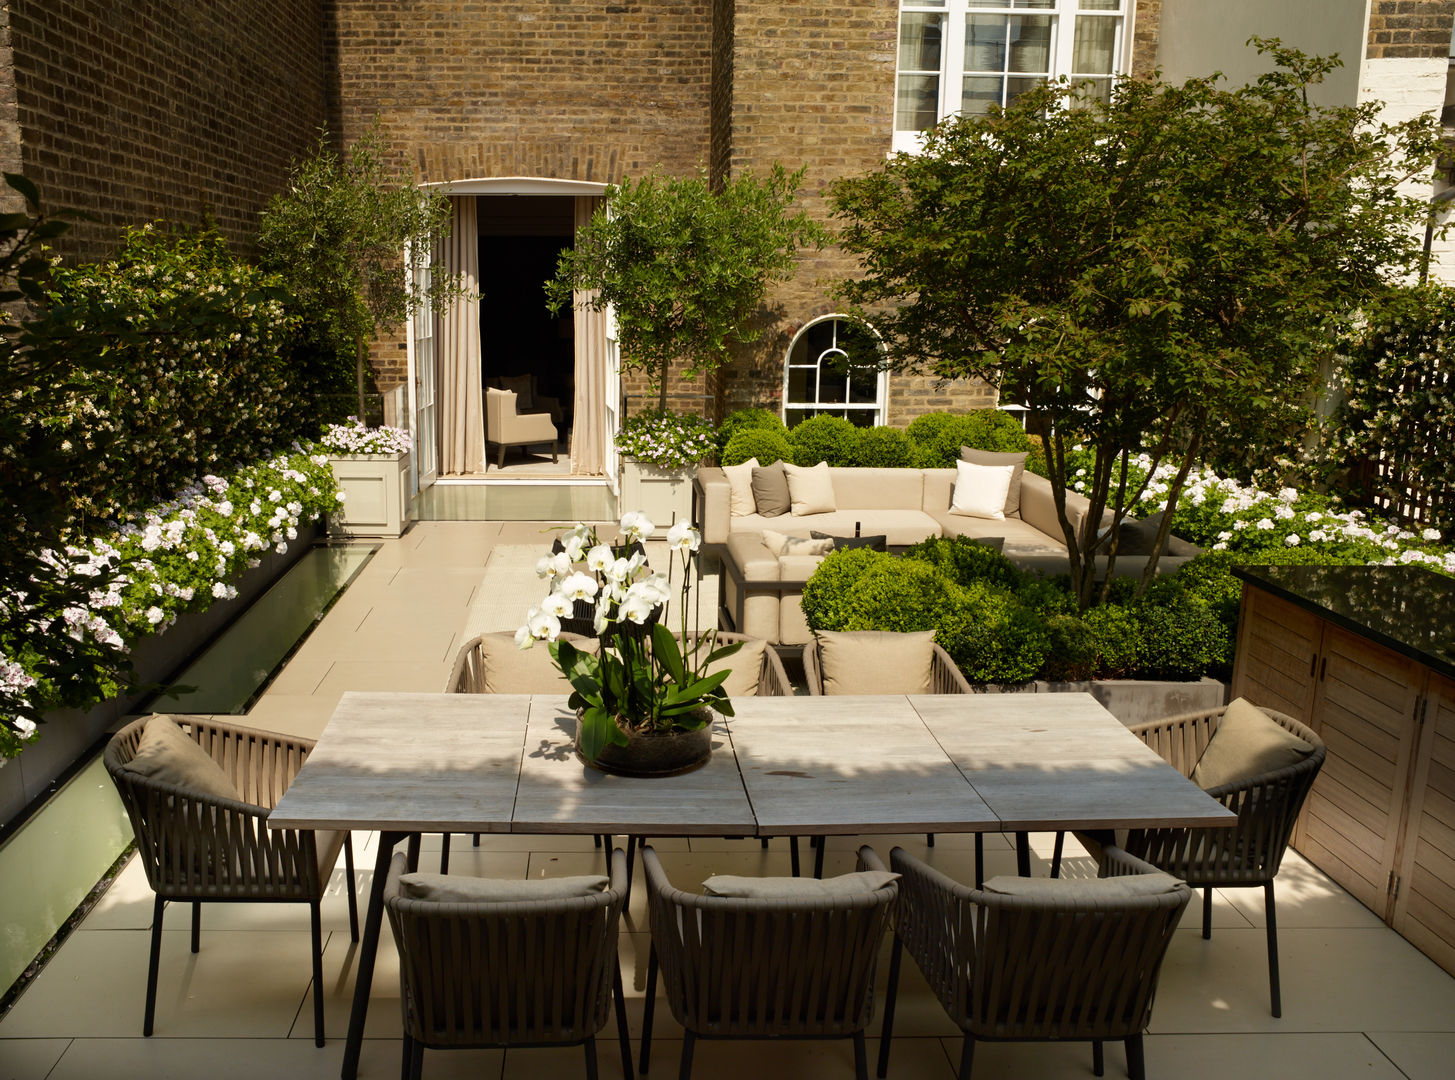 A London Roof Garden, Bowles & Wyer Bowles & Wyer Terrace